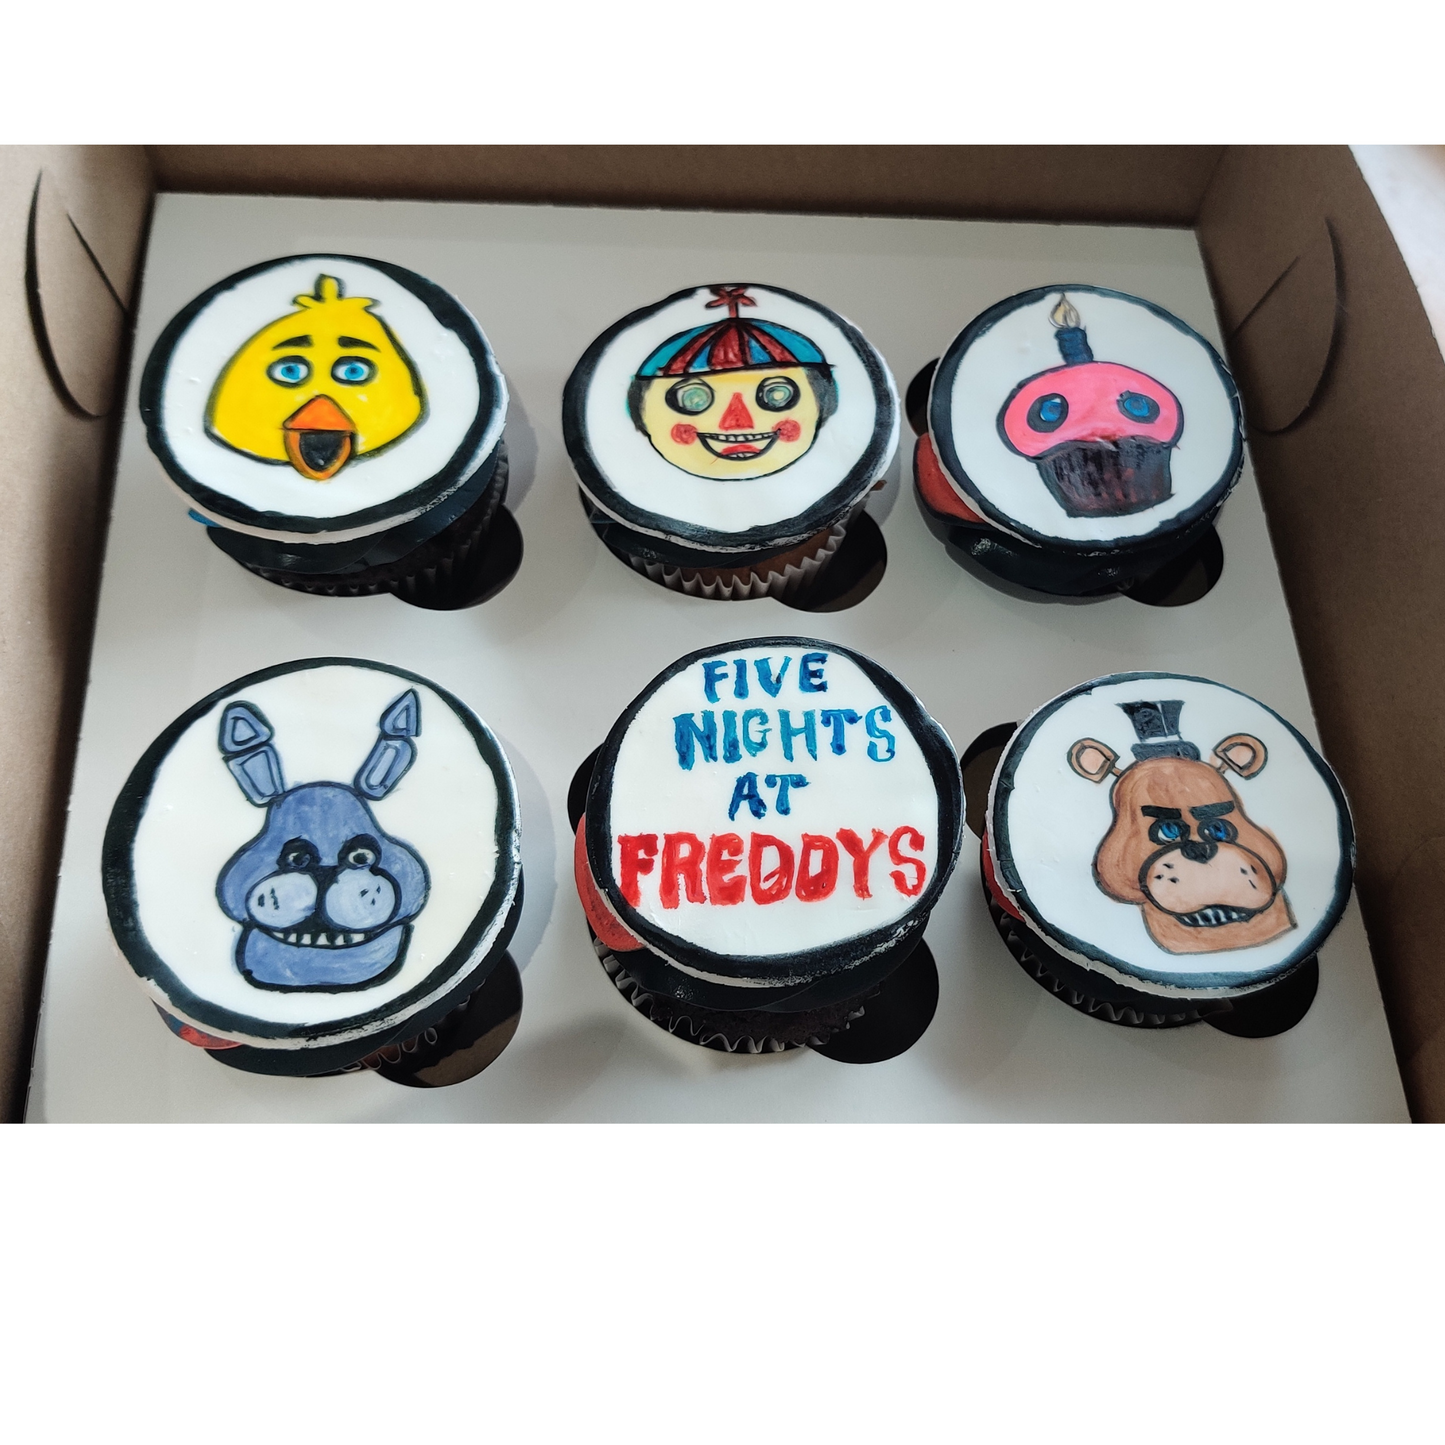 Five Nights at Freddy's Themed Cupcakes